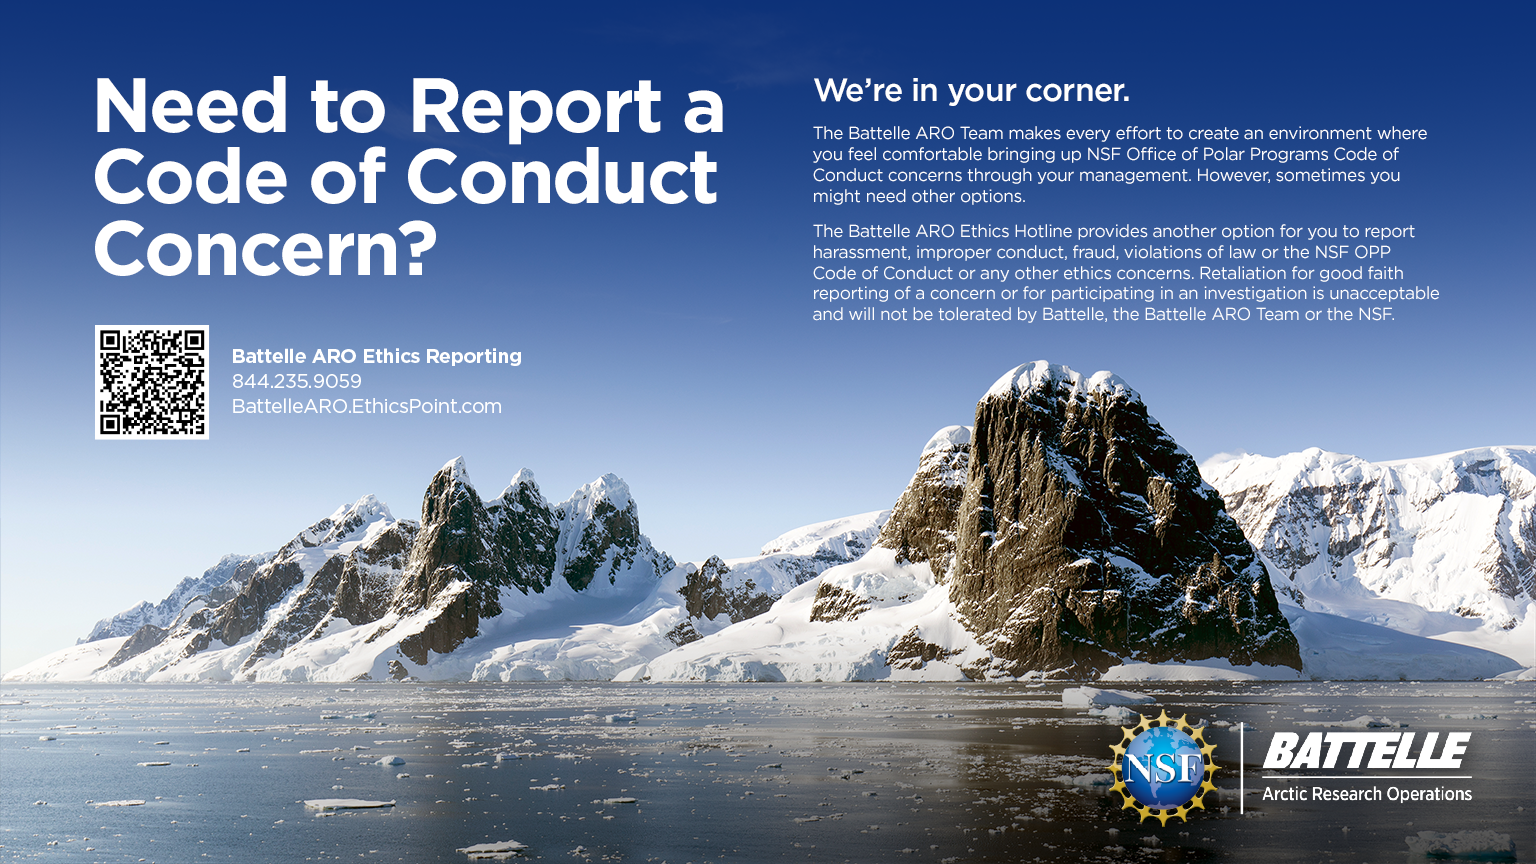 Need to Report a Code of Conduct Concern?